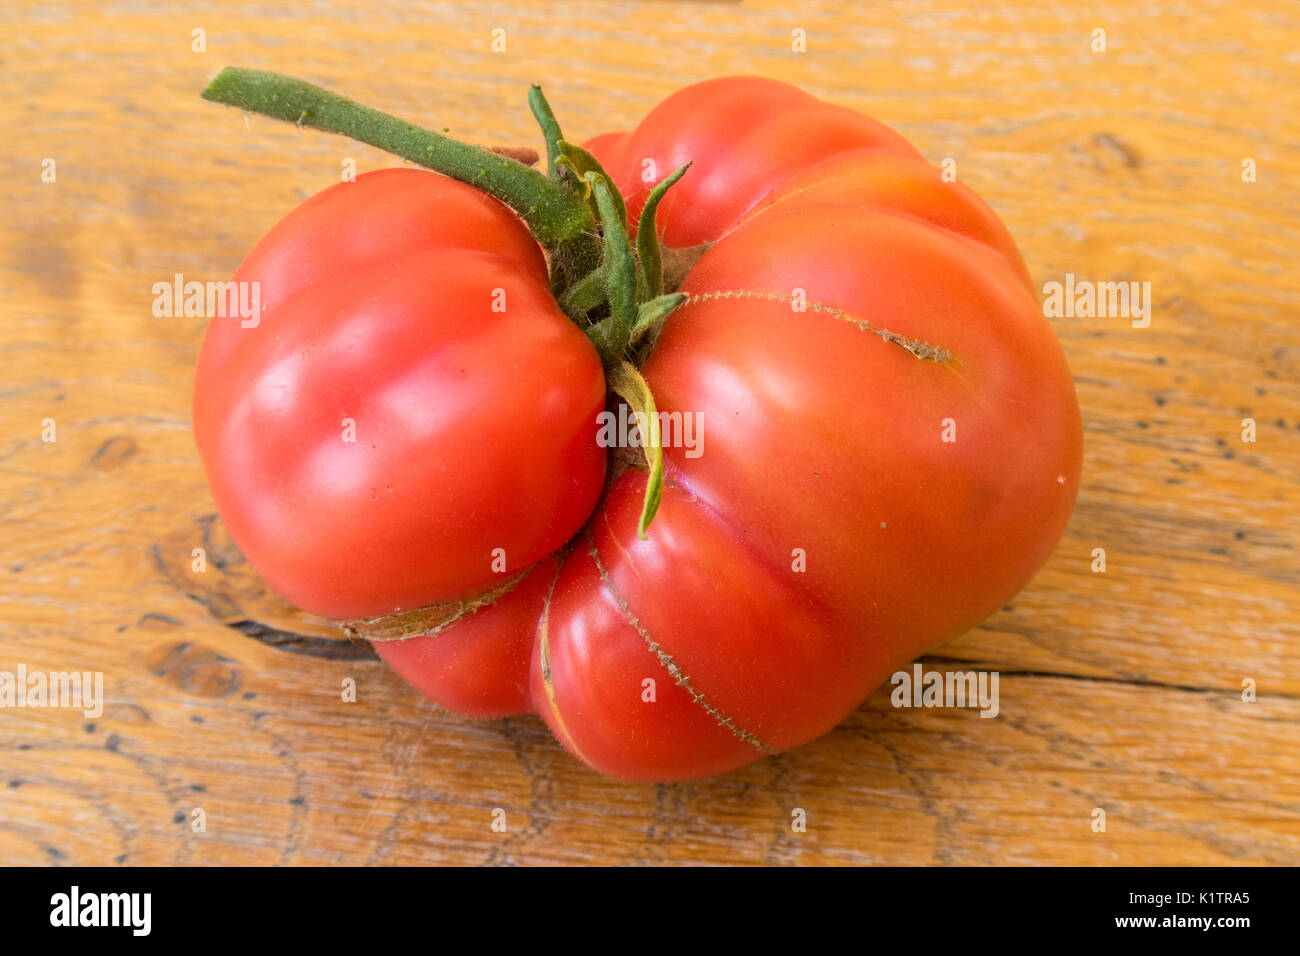 A large beef tomato,Heritage Brandy Wine, growing into an awkward folded shape Stock Photo